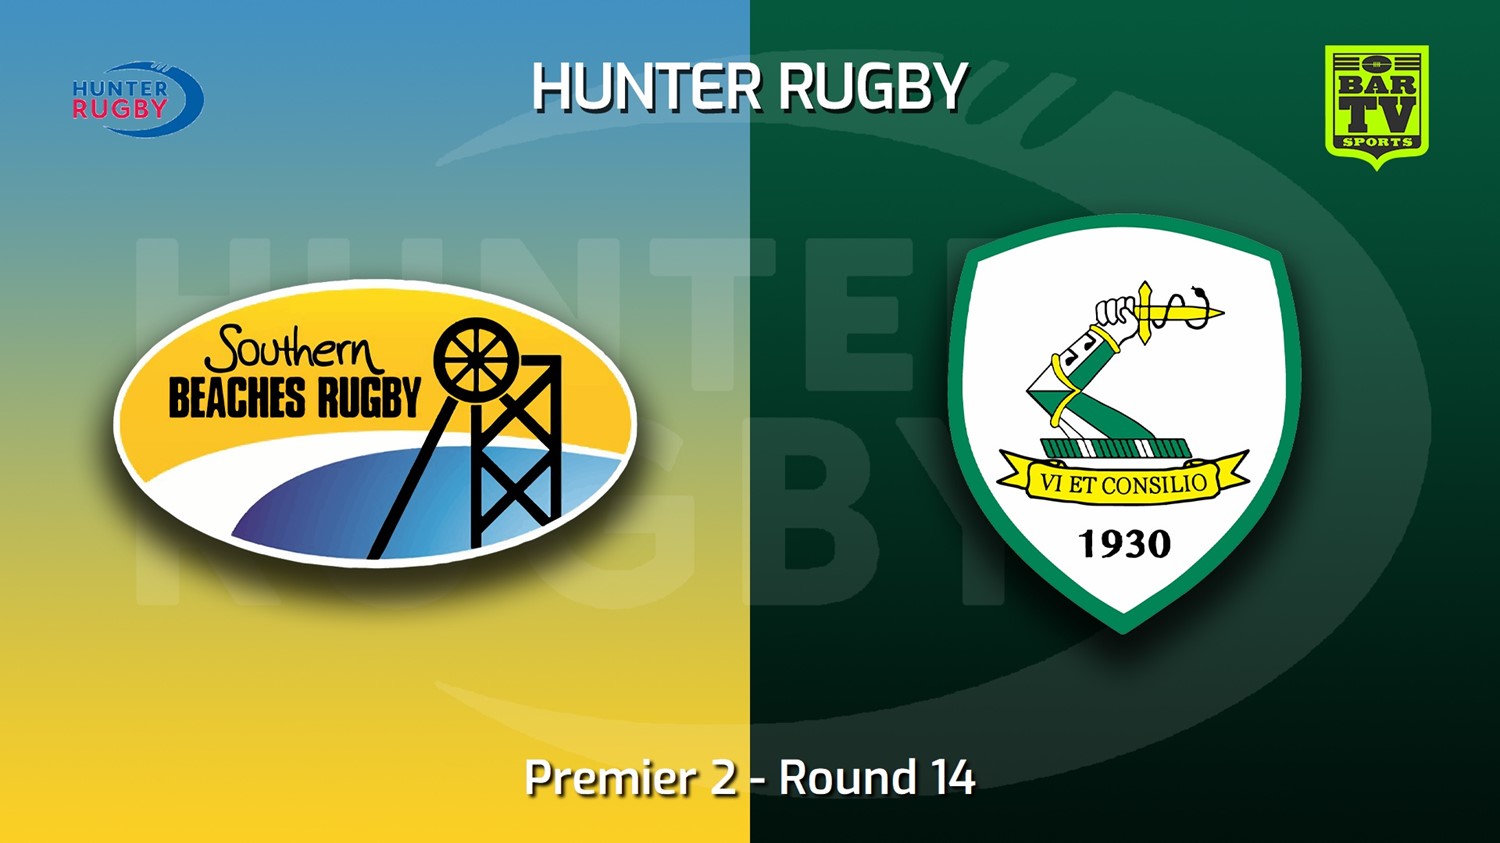 220730-Hunter Rugby Round 14 - Premier 2 - Southern Beaches v Merewether Carlton Slate Image